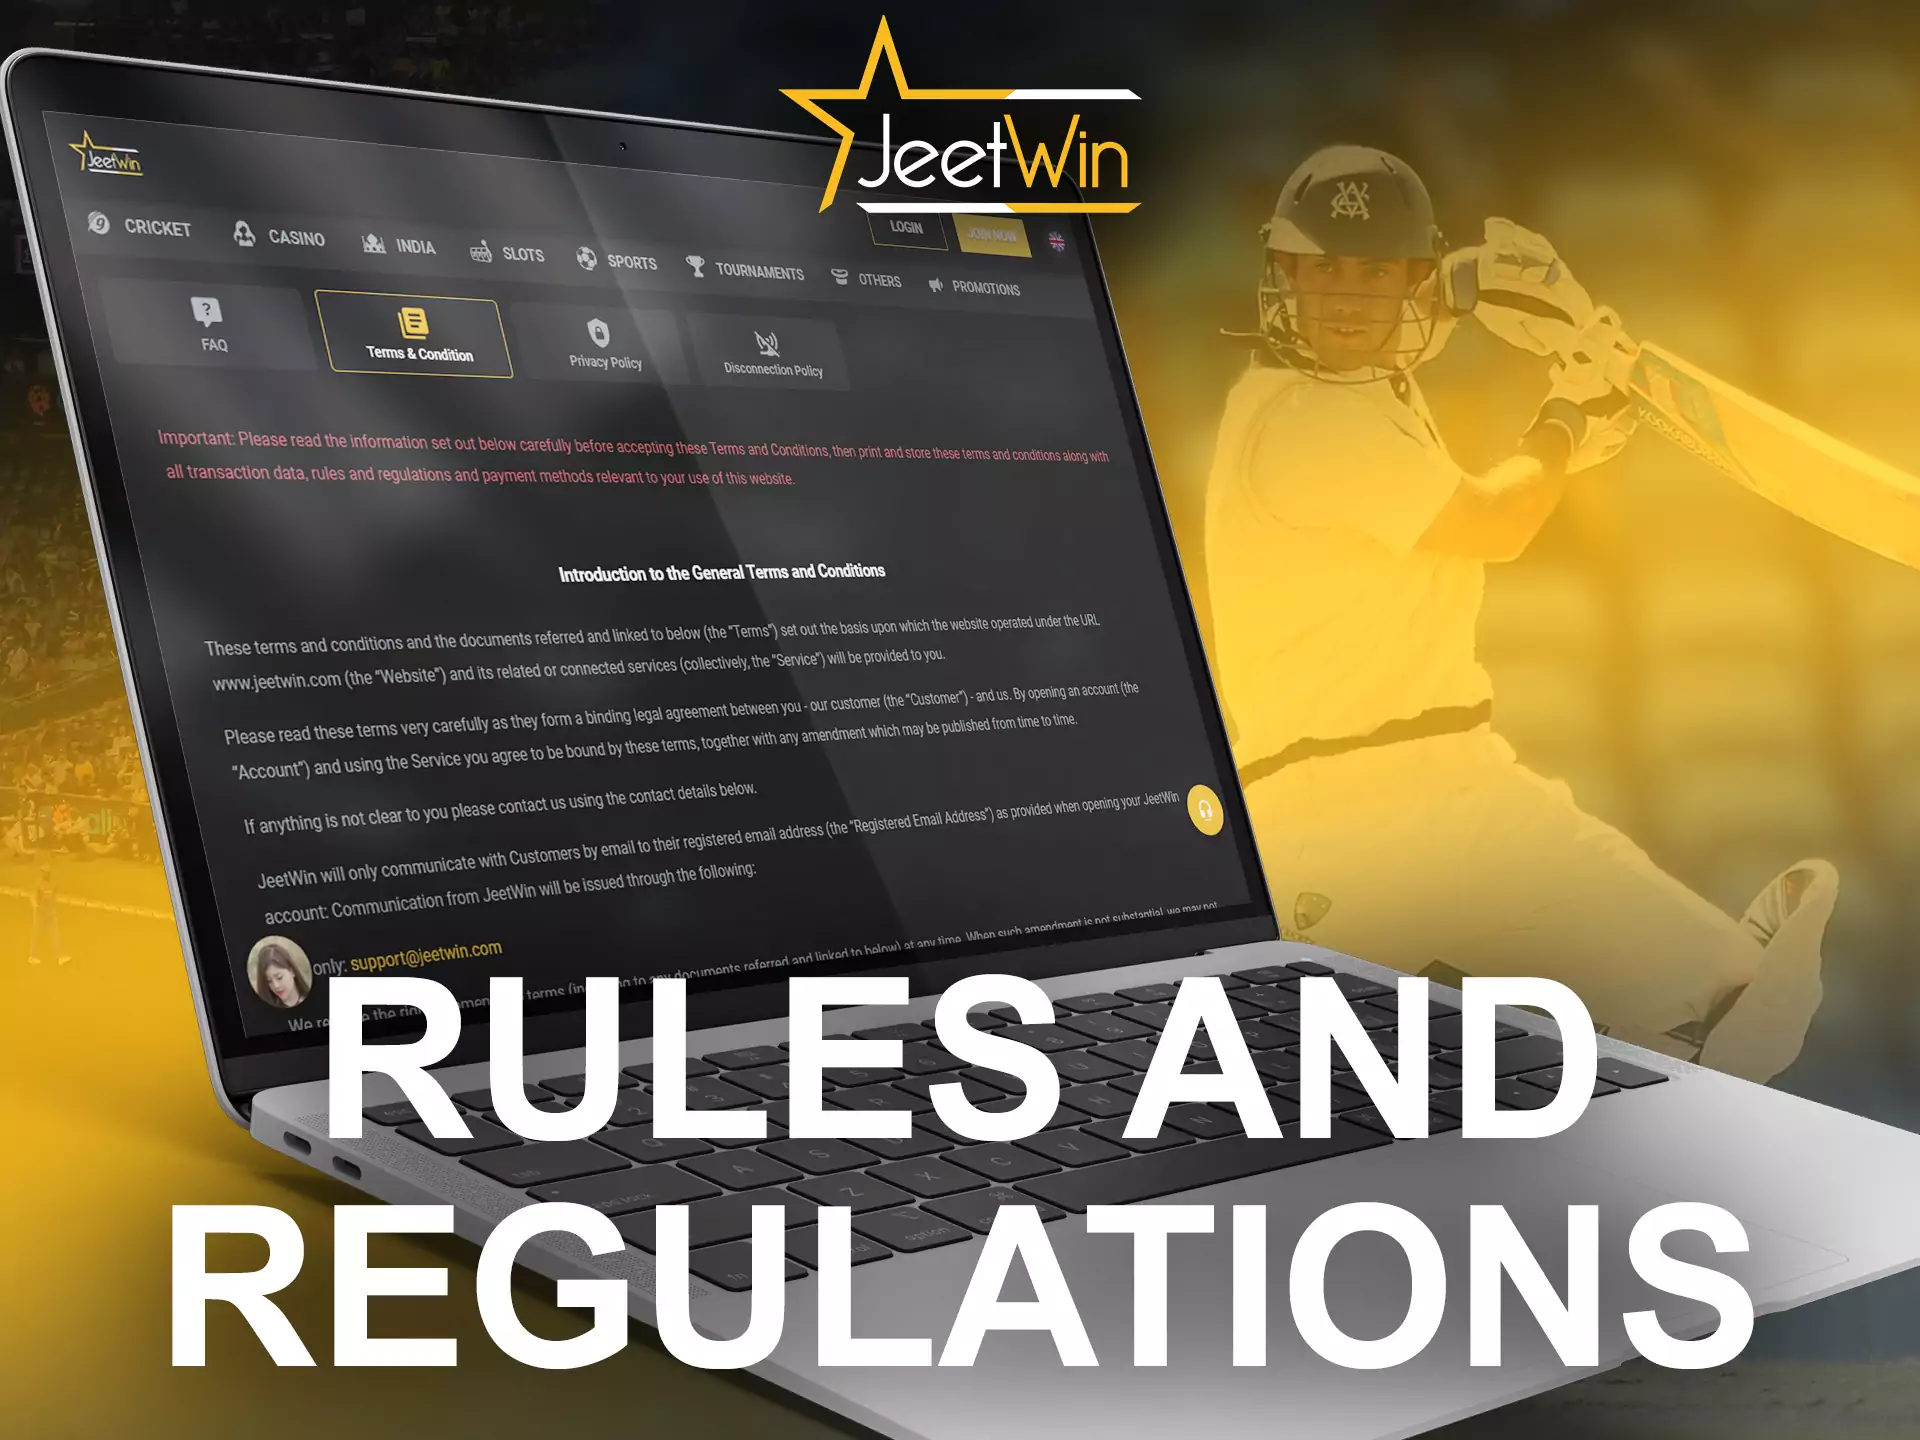 Get to know the JeetWin rules to start playing.